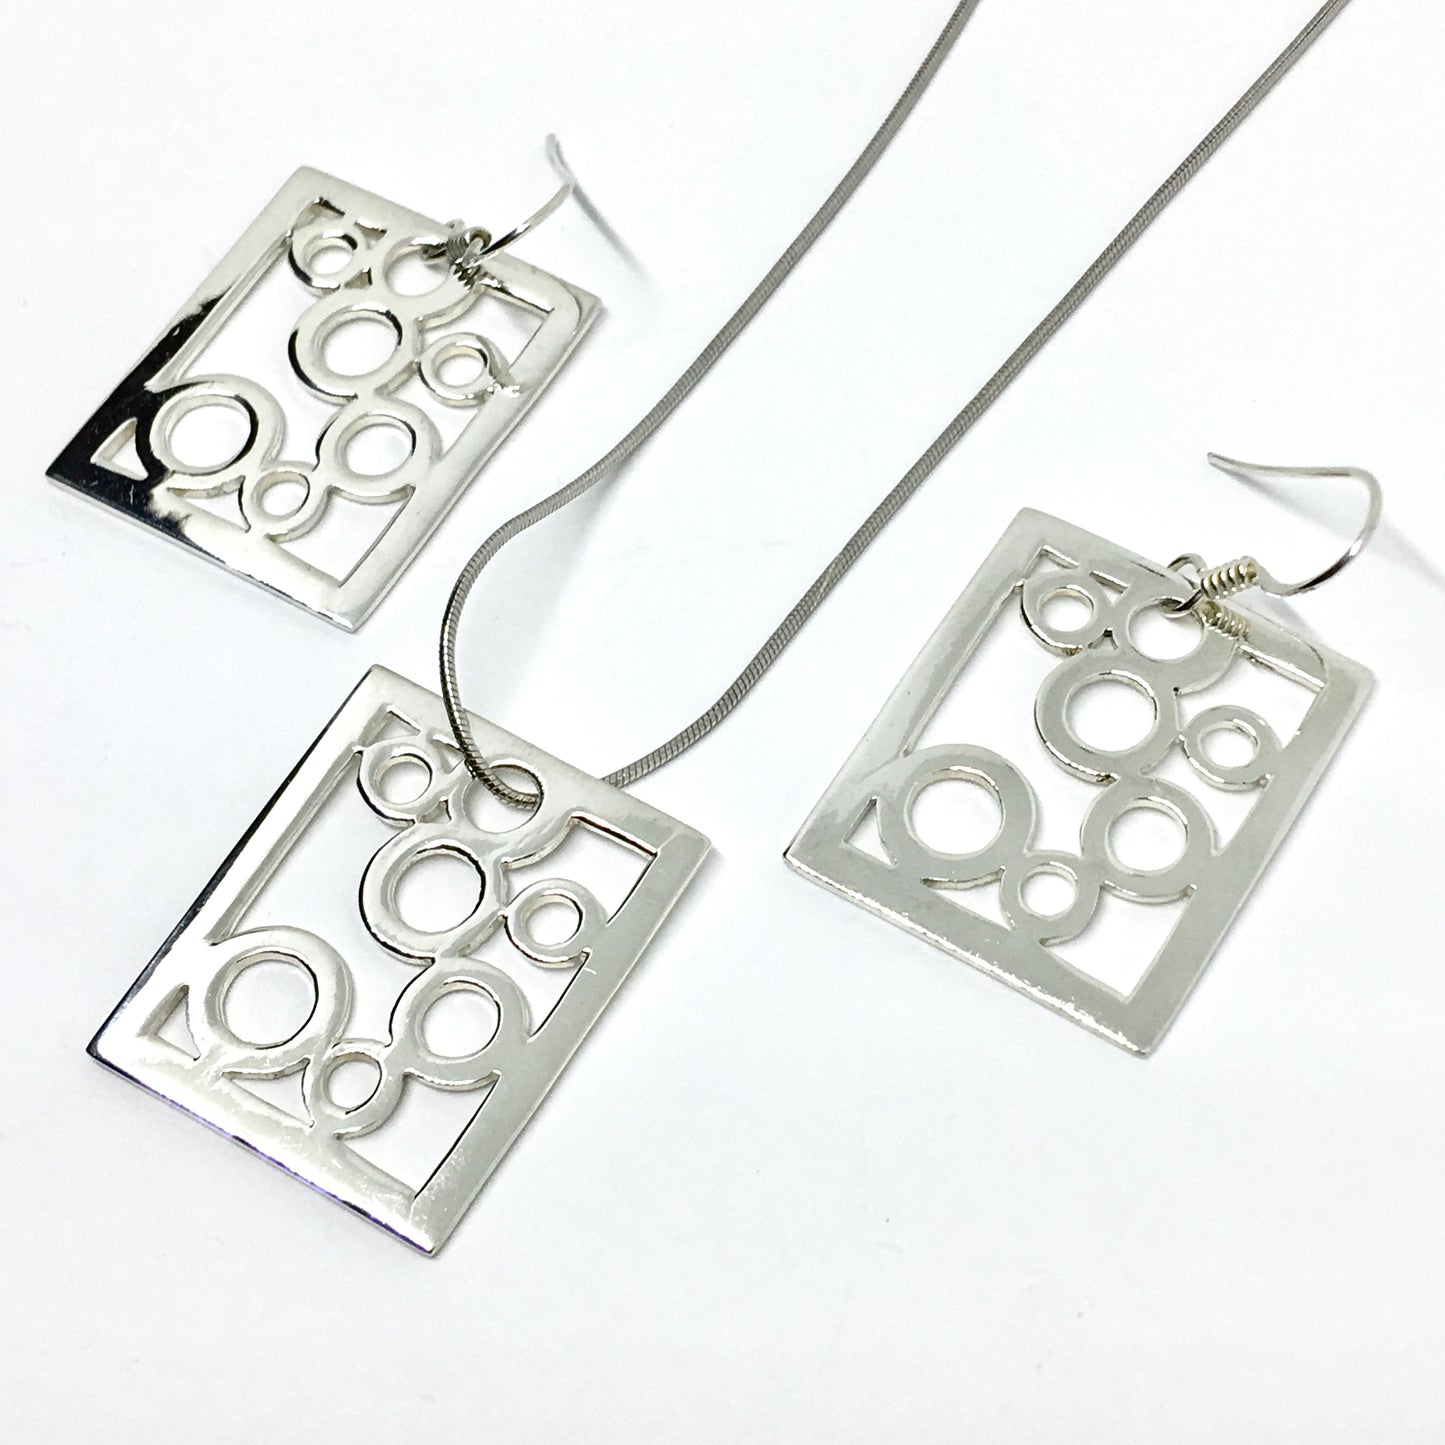 Jewelry Accessories - Artsy Circle Design Sterling Silver Pendant Necklace & Earrings set